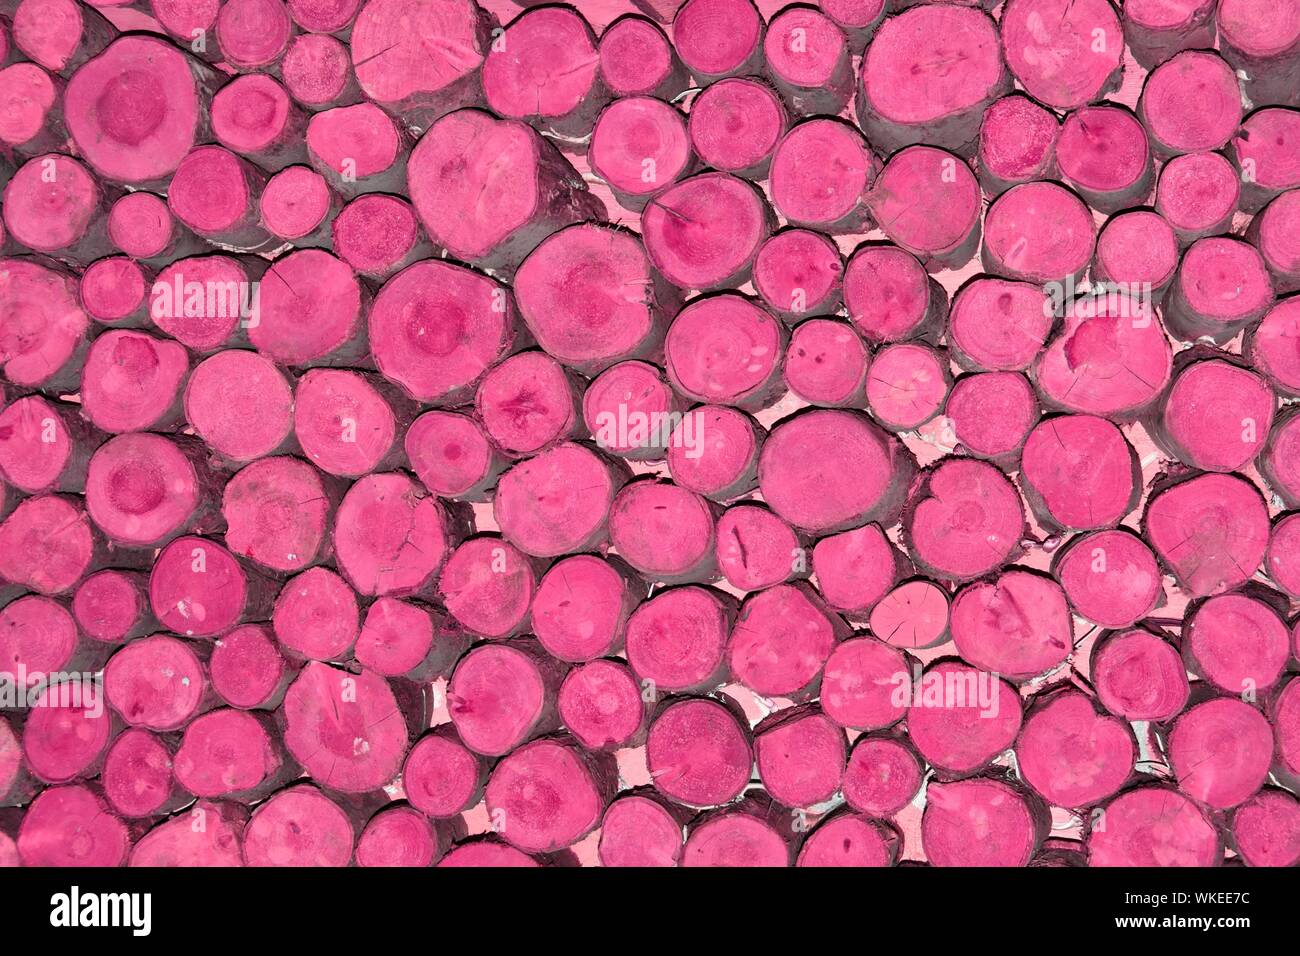 Abstract background pattern image manipulated pink colour applied to ends stacked short lengths of random diameter round sawn timber logs England UK Stock Photo